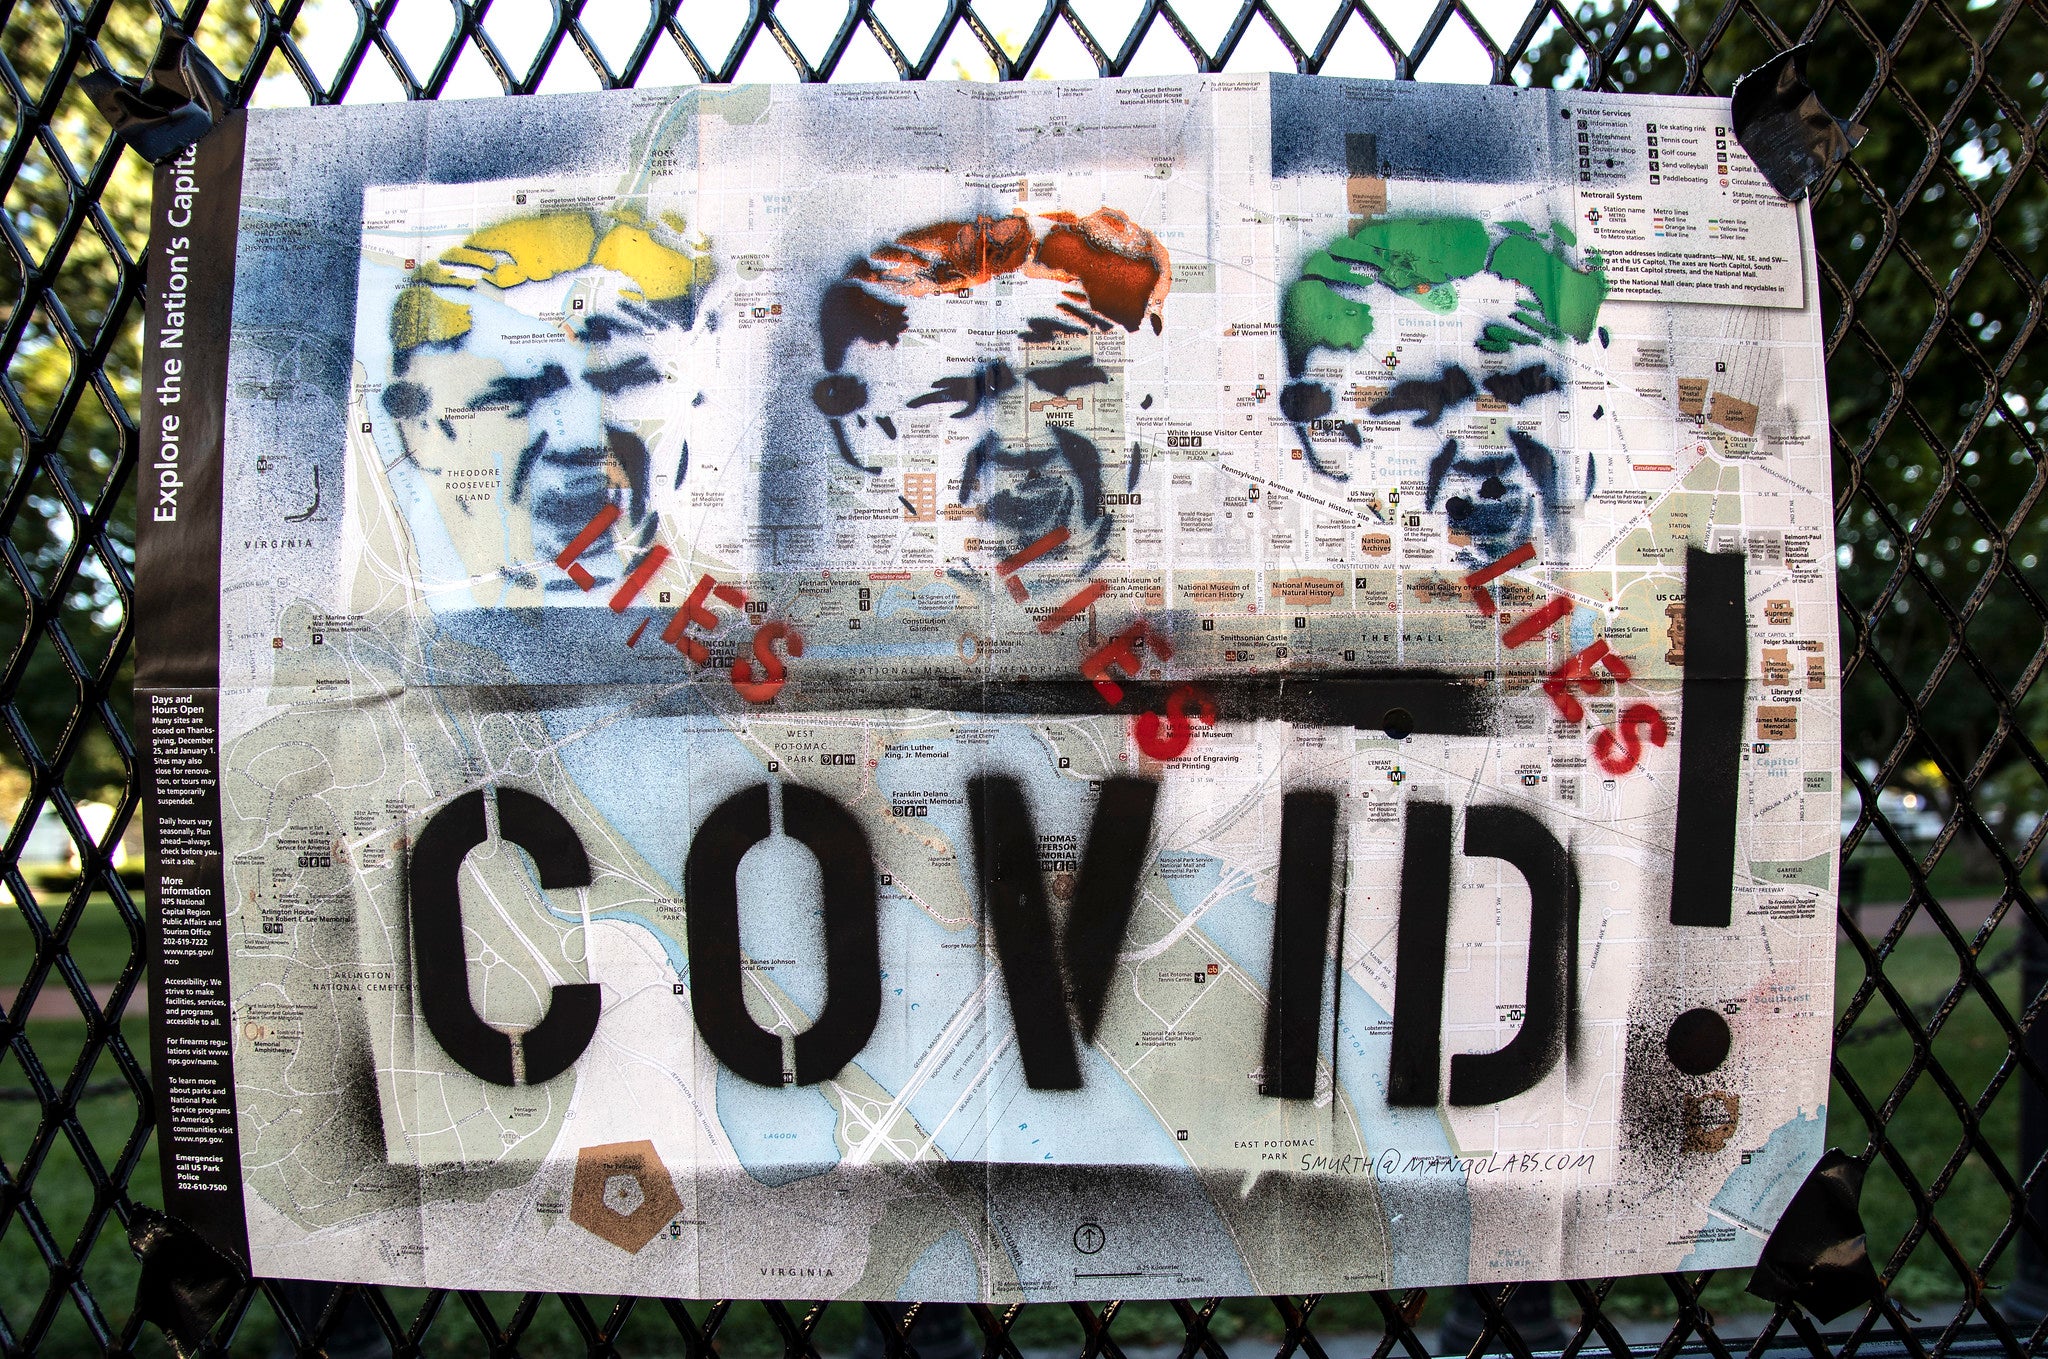 Graffitti covering map of Washington DC. The graffitti shows the icon of Donald Trump three times, the hair color of the first is yellow, of the second red, and the third green. Under each, the word "lies" is written. Underneath appears the word "Covid!"